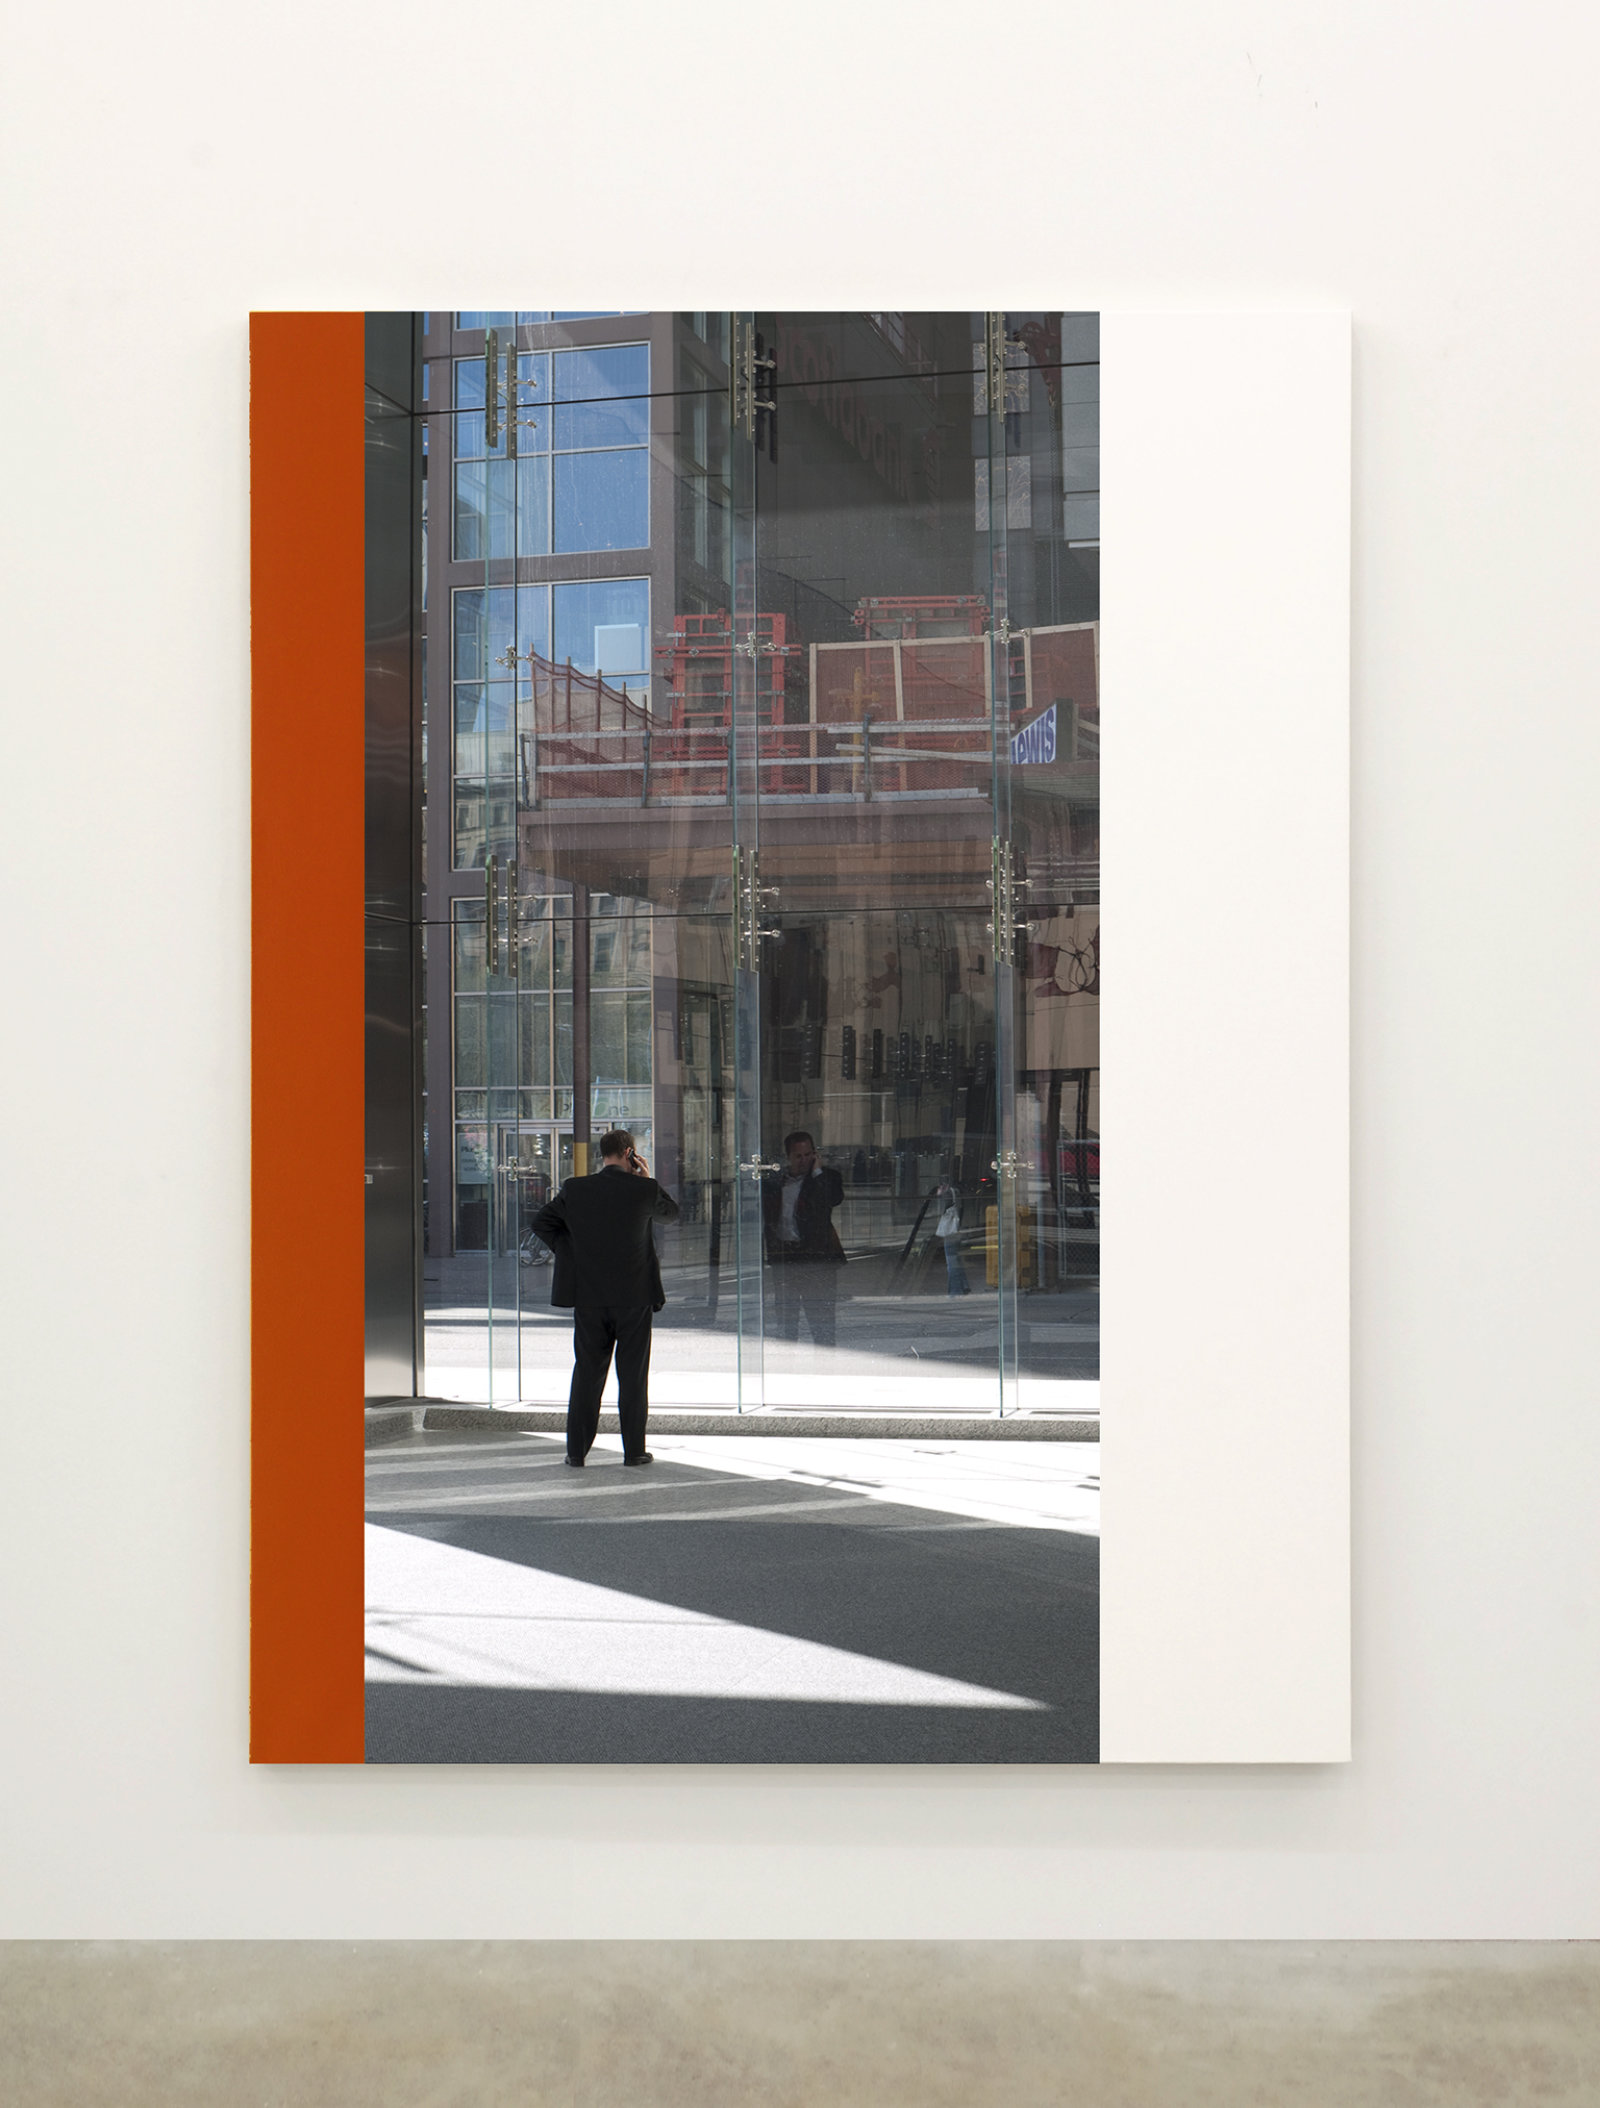 Ian Wallace, Abstract Painting III (The Financial District), 2010, 12 photolaminate with acrylic on canvas panels, each 96 x 72 in. (244 x 183 cm)